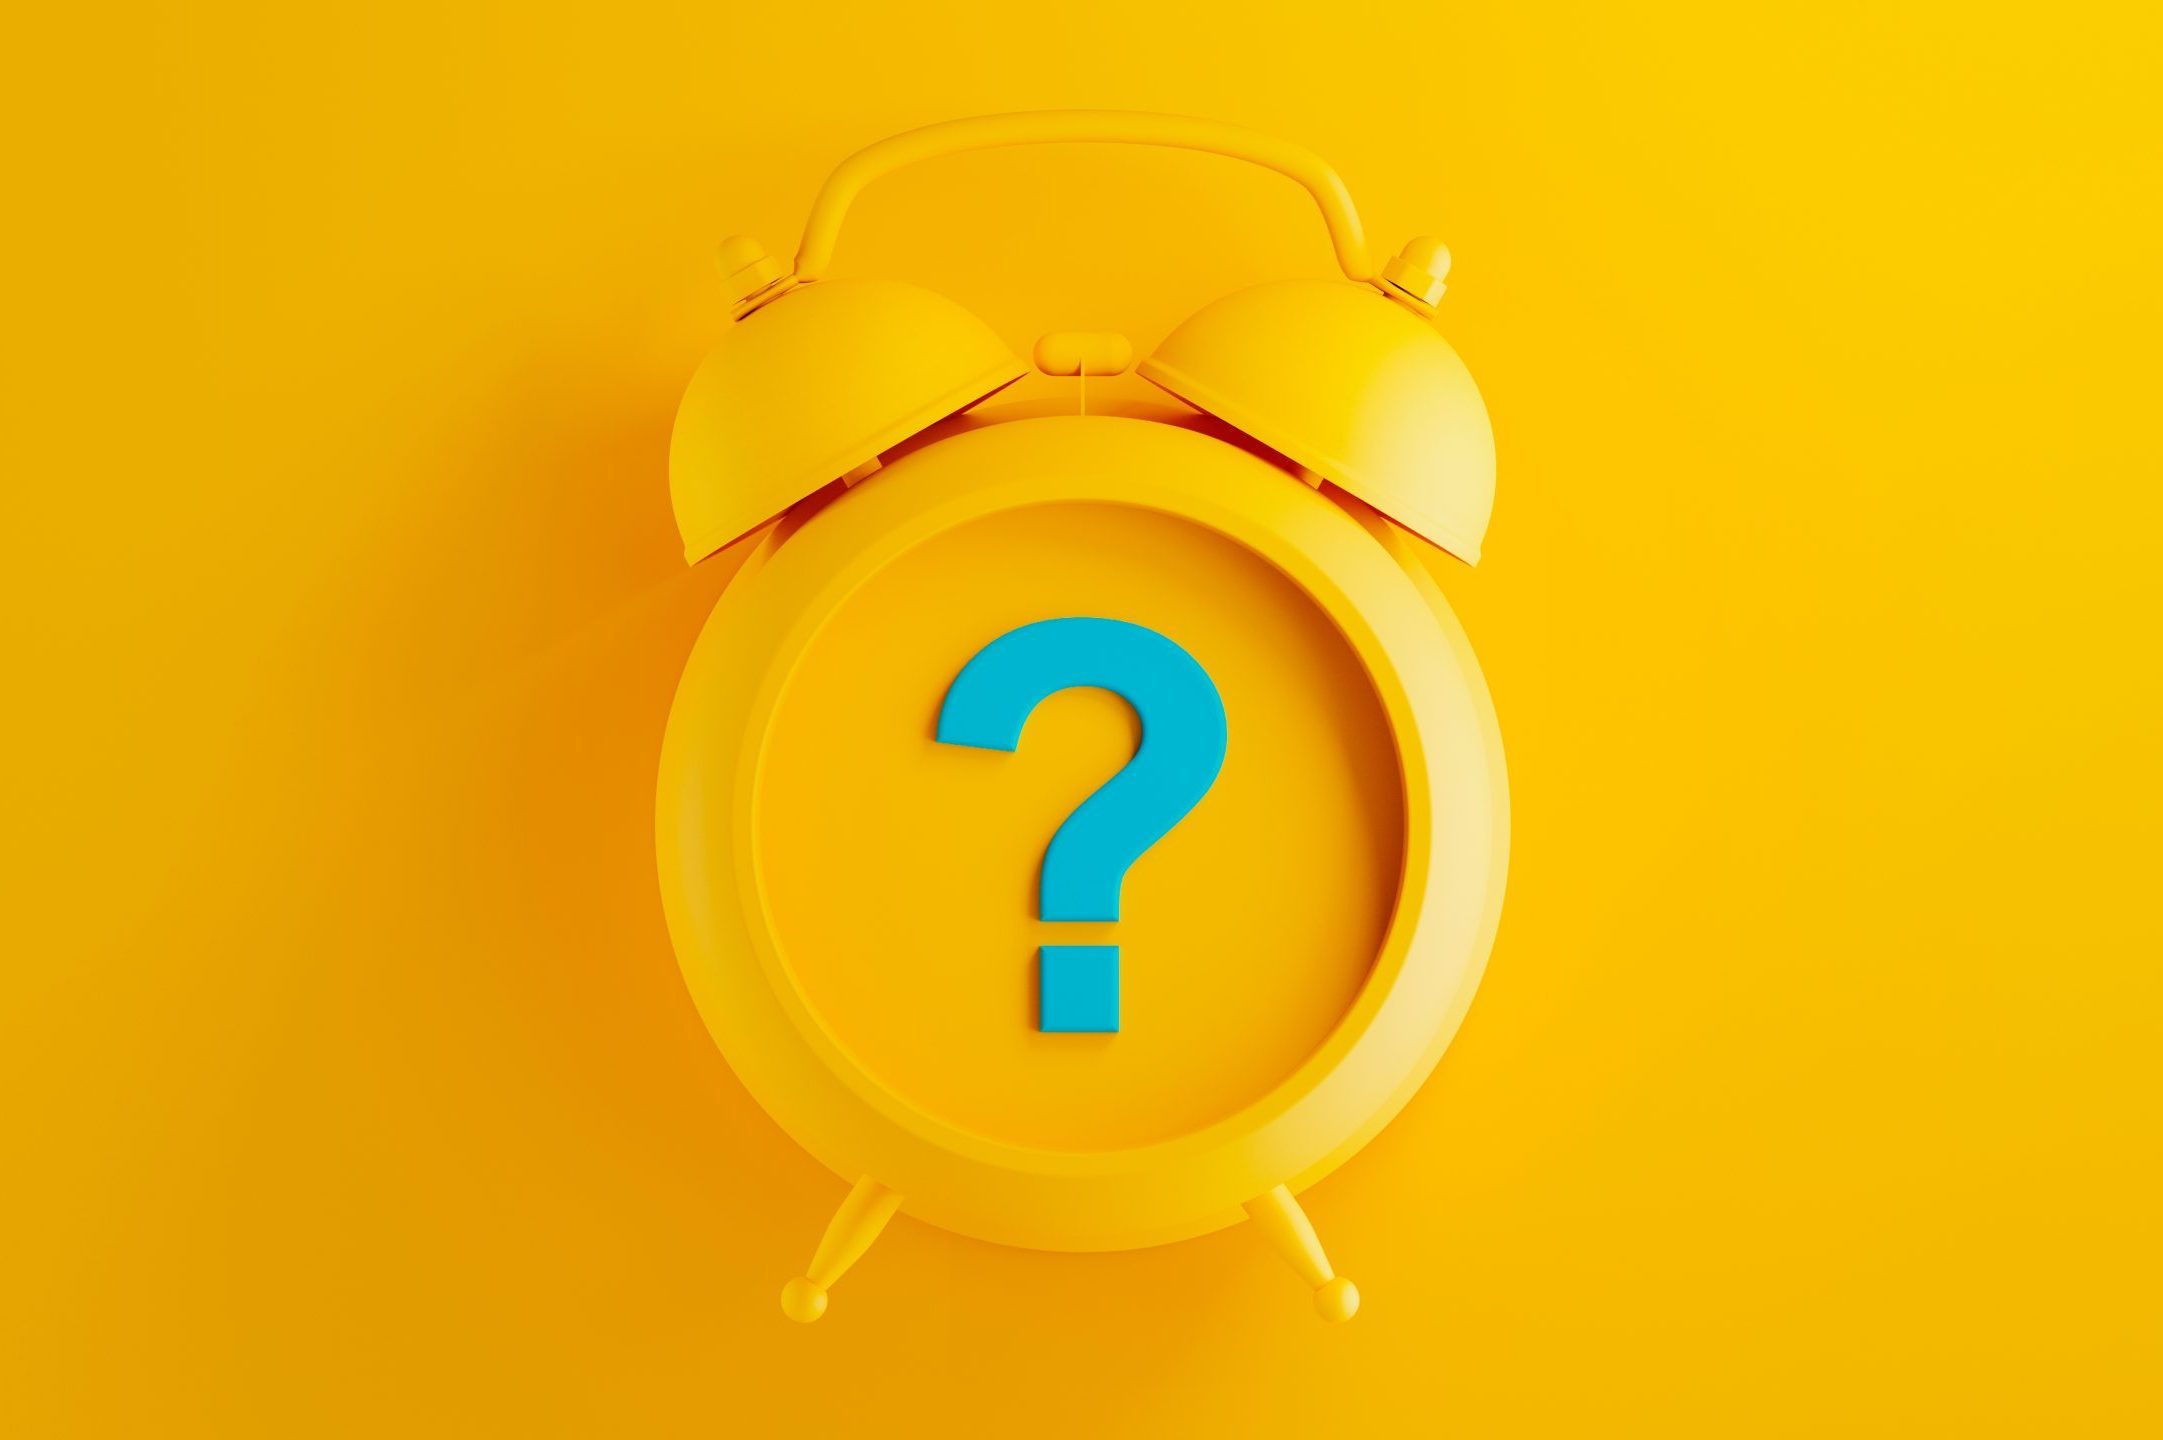 yellow alarm clock on yellow background with blue question mark symbol